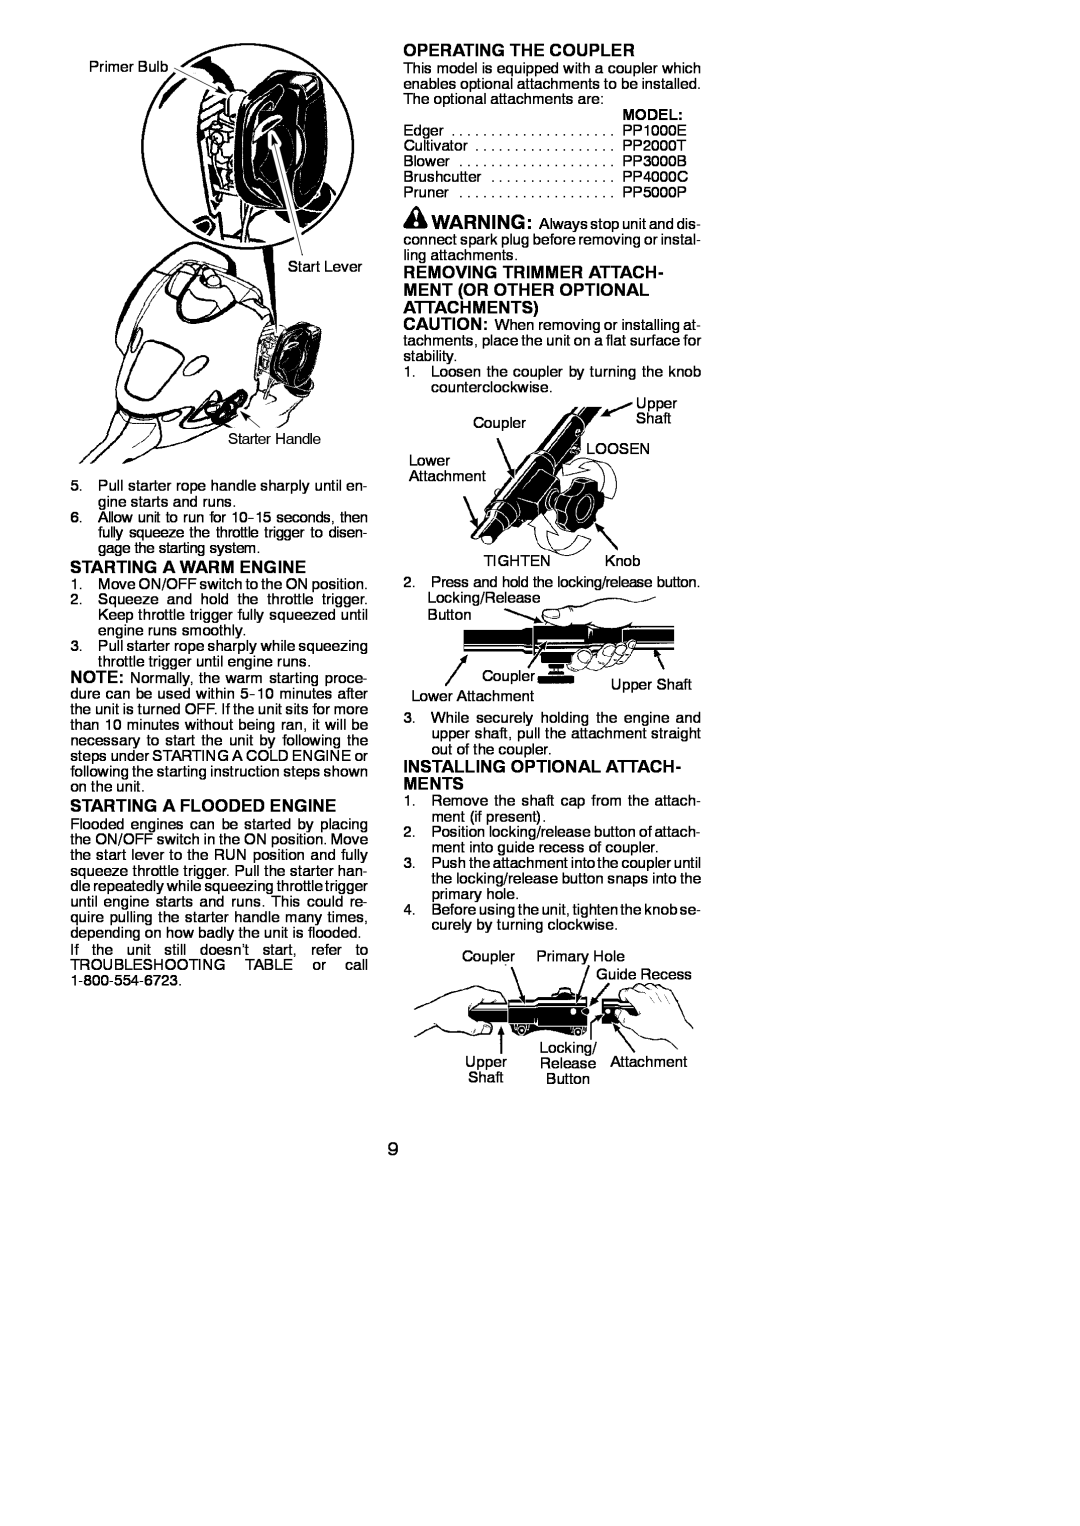 Poulan 545137277 instruction manual Starting A Warm Engine, Starting A Flooded Engine, Operating The Coupler 